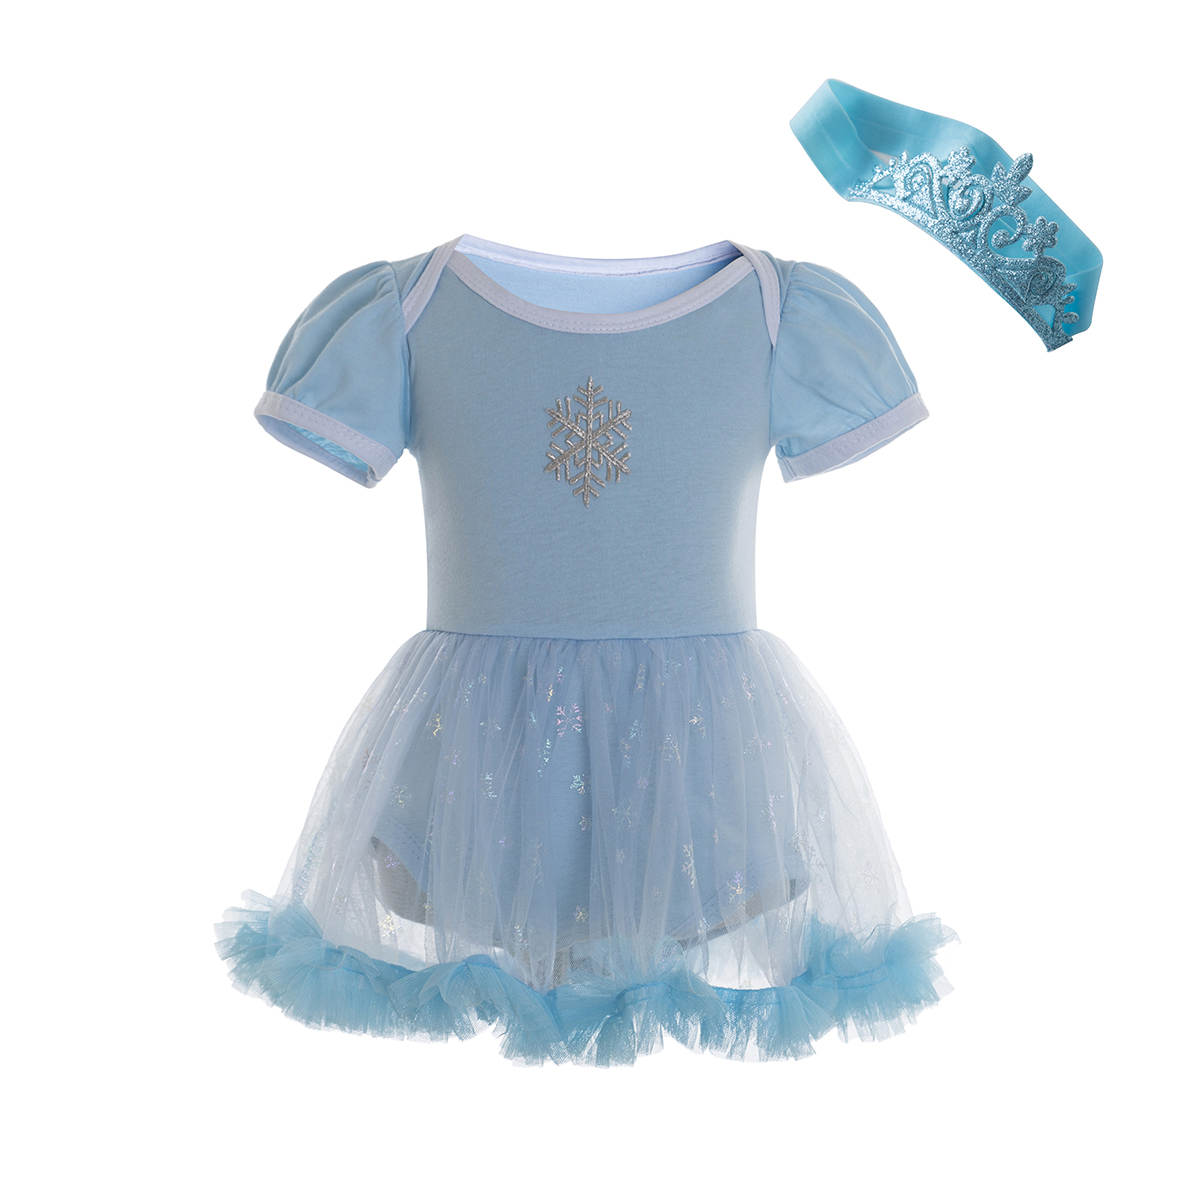 Elsa Baby - Great for Halloween or any Fancy dress